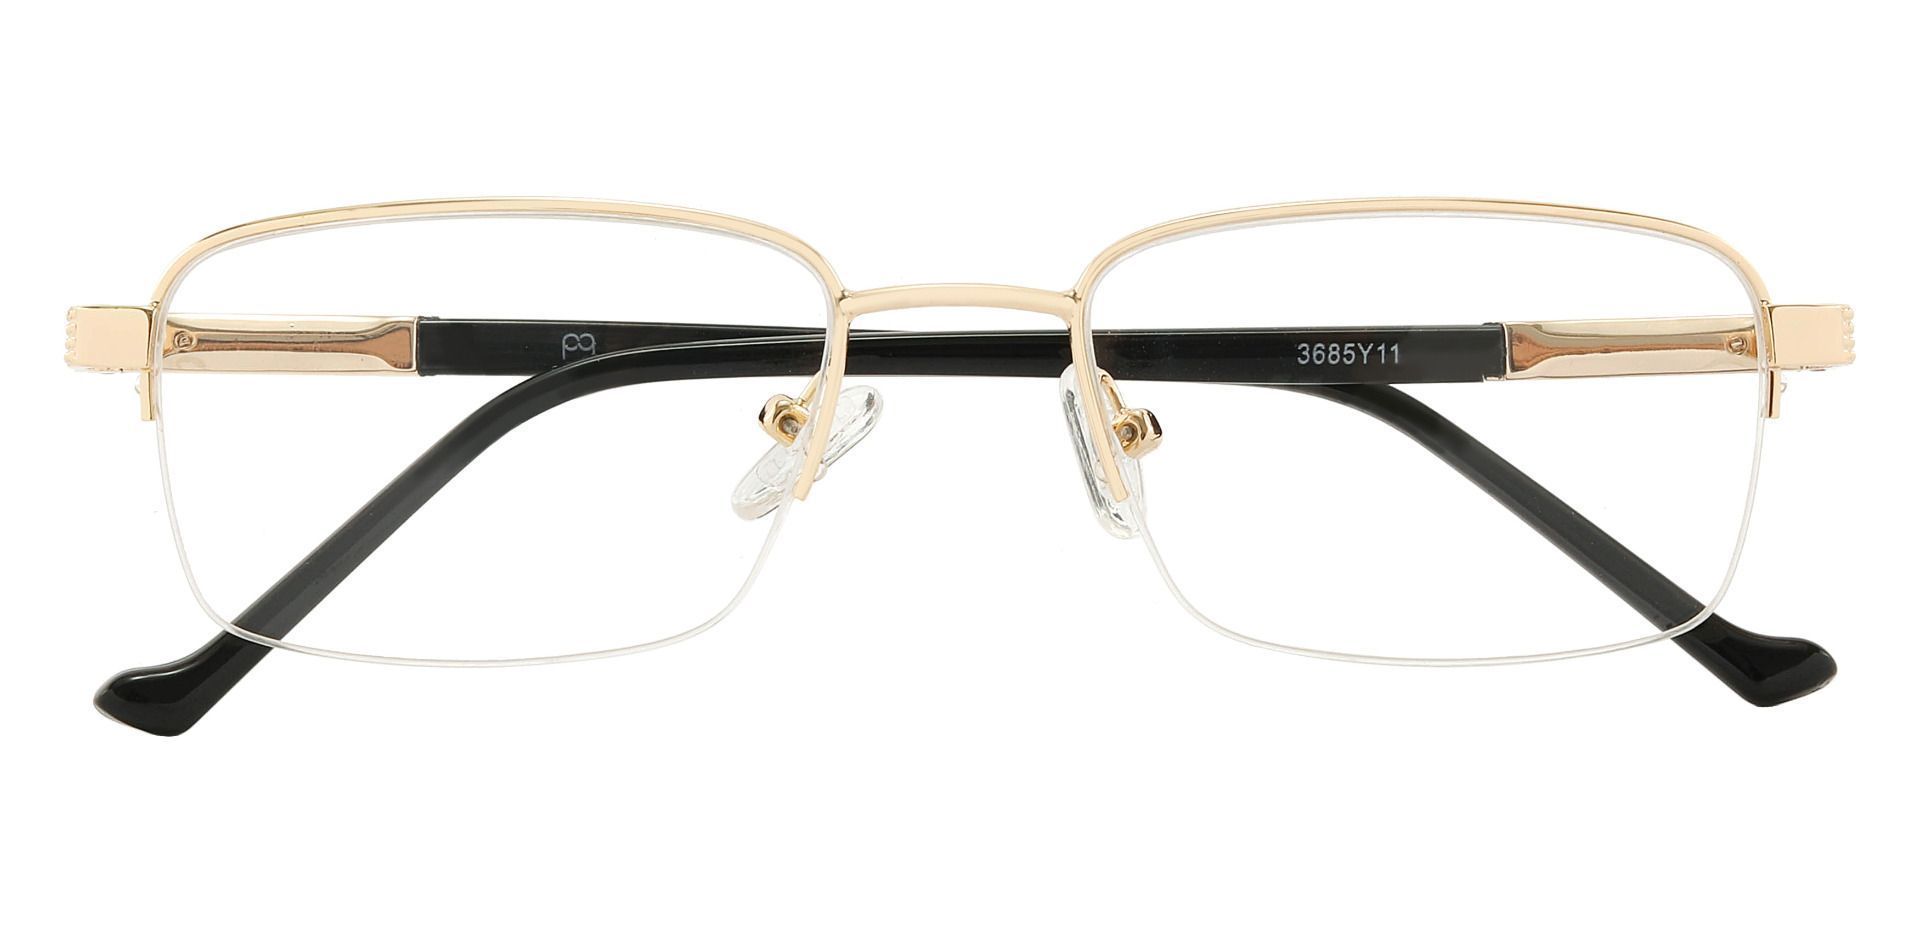 Canton Rectangle Lined Bifocal Glasses - Gold